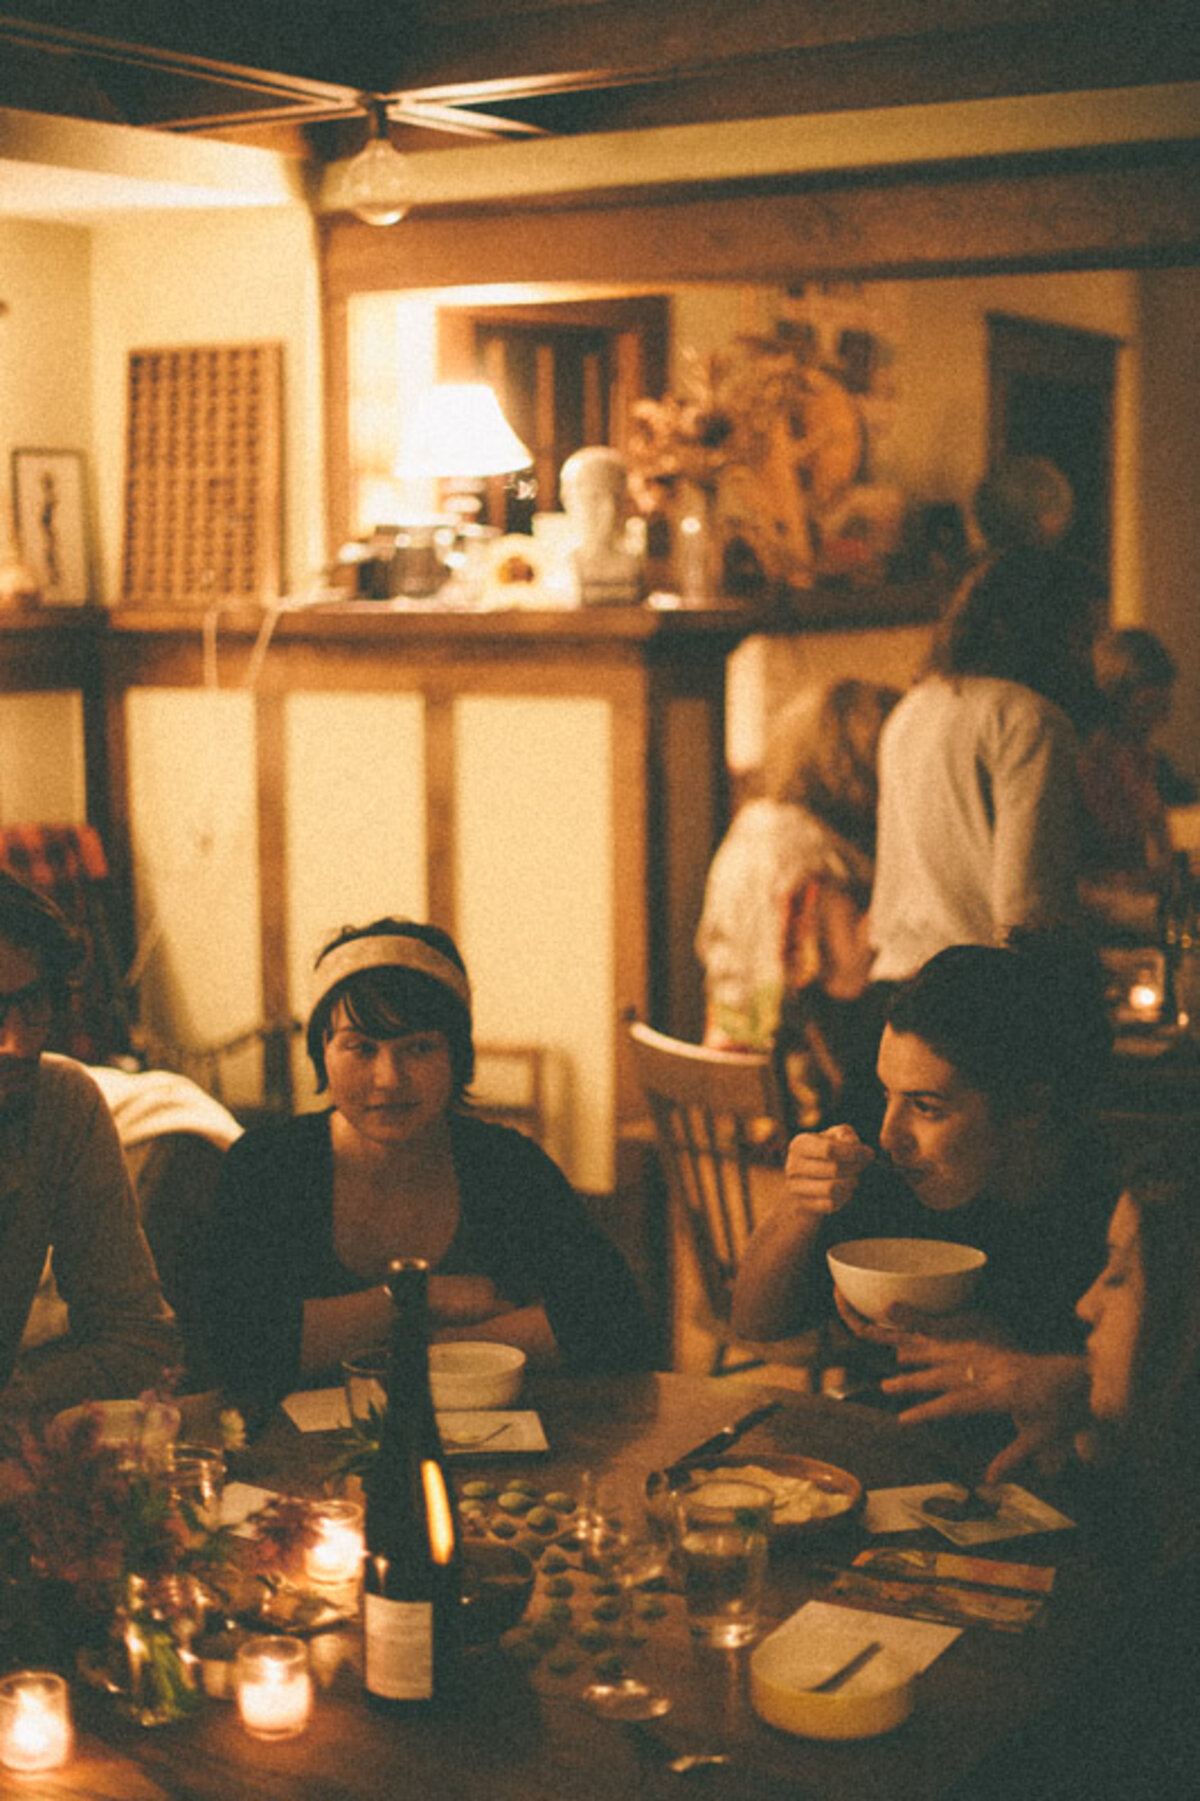 People sitting at a round table eating dinner in low light